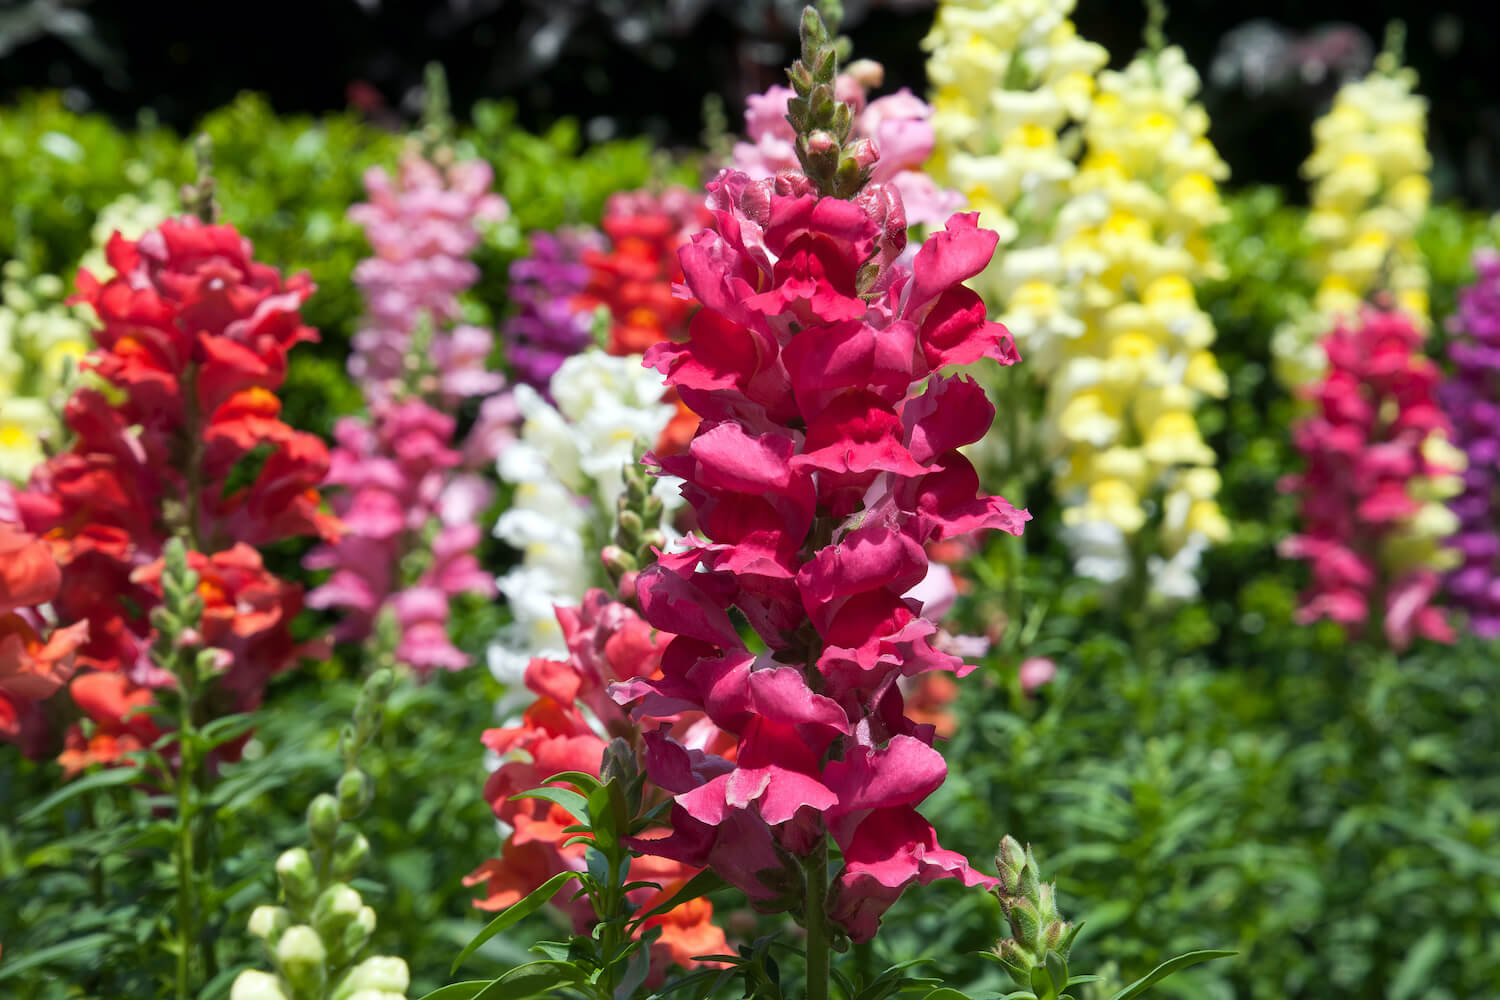 Does pruning my snapdragons depend on the season?